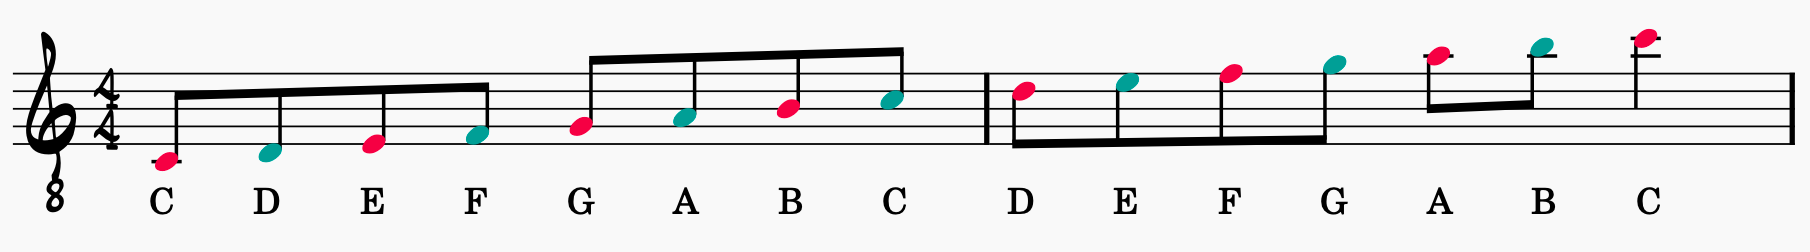 Cheat Sheet For Chord Tones In C Major Scale